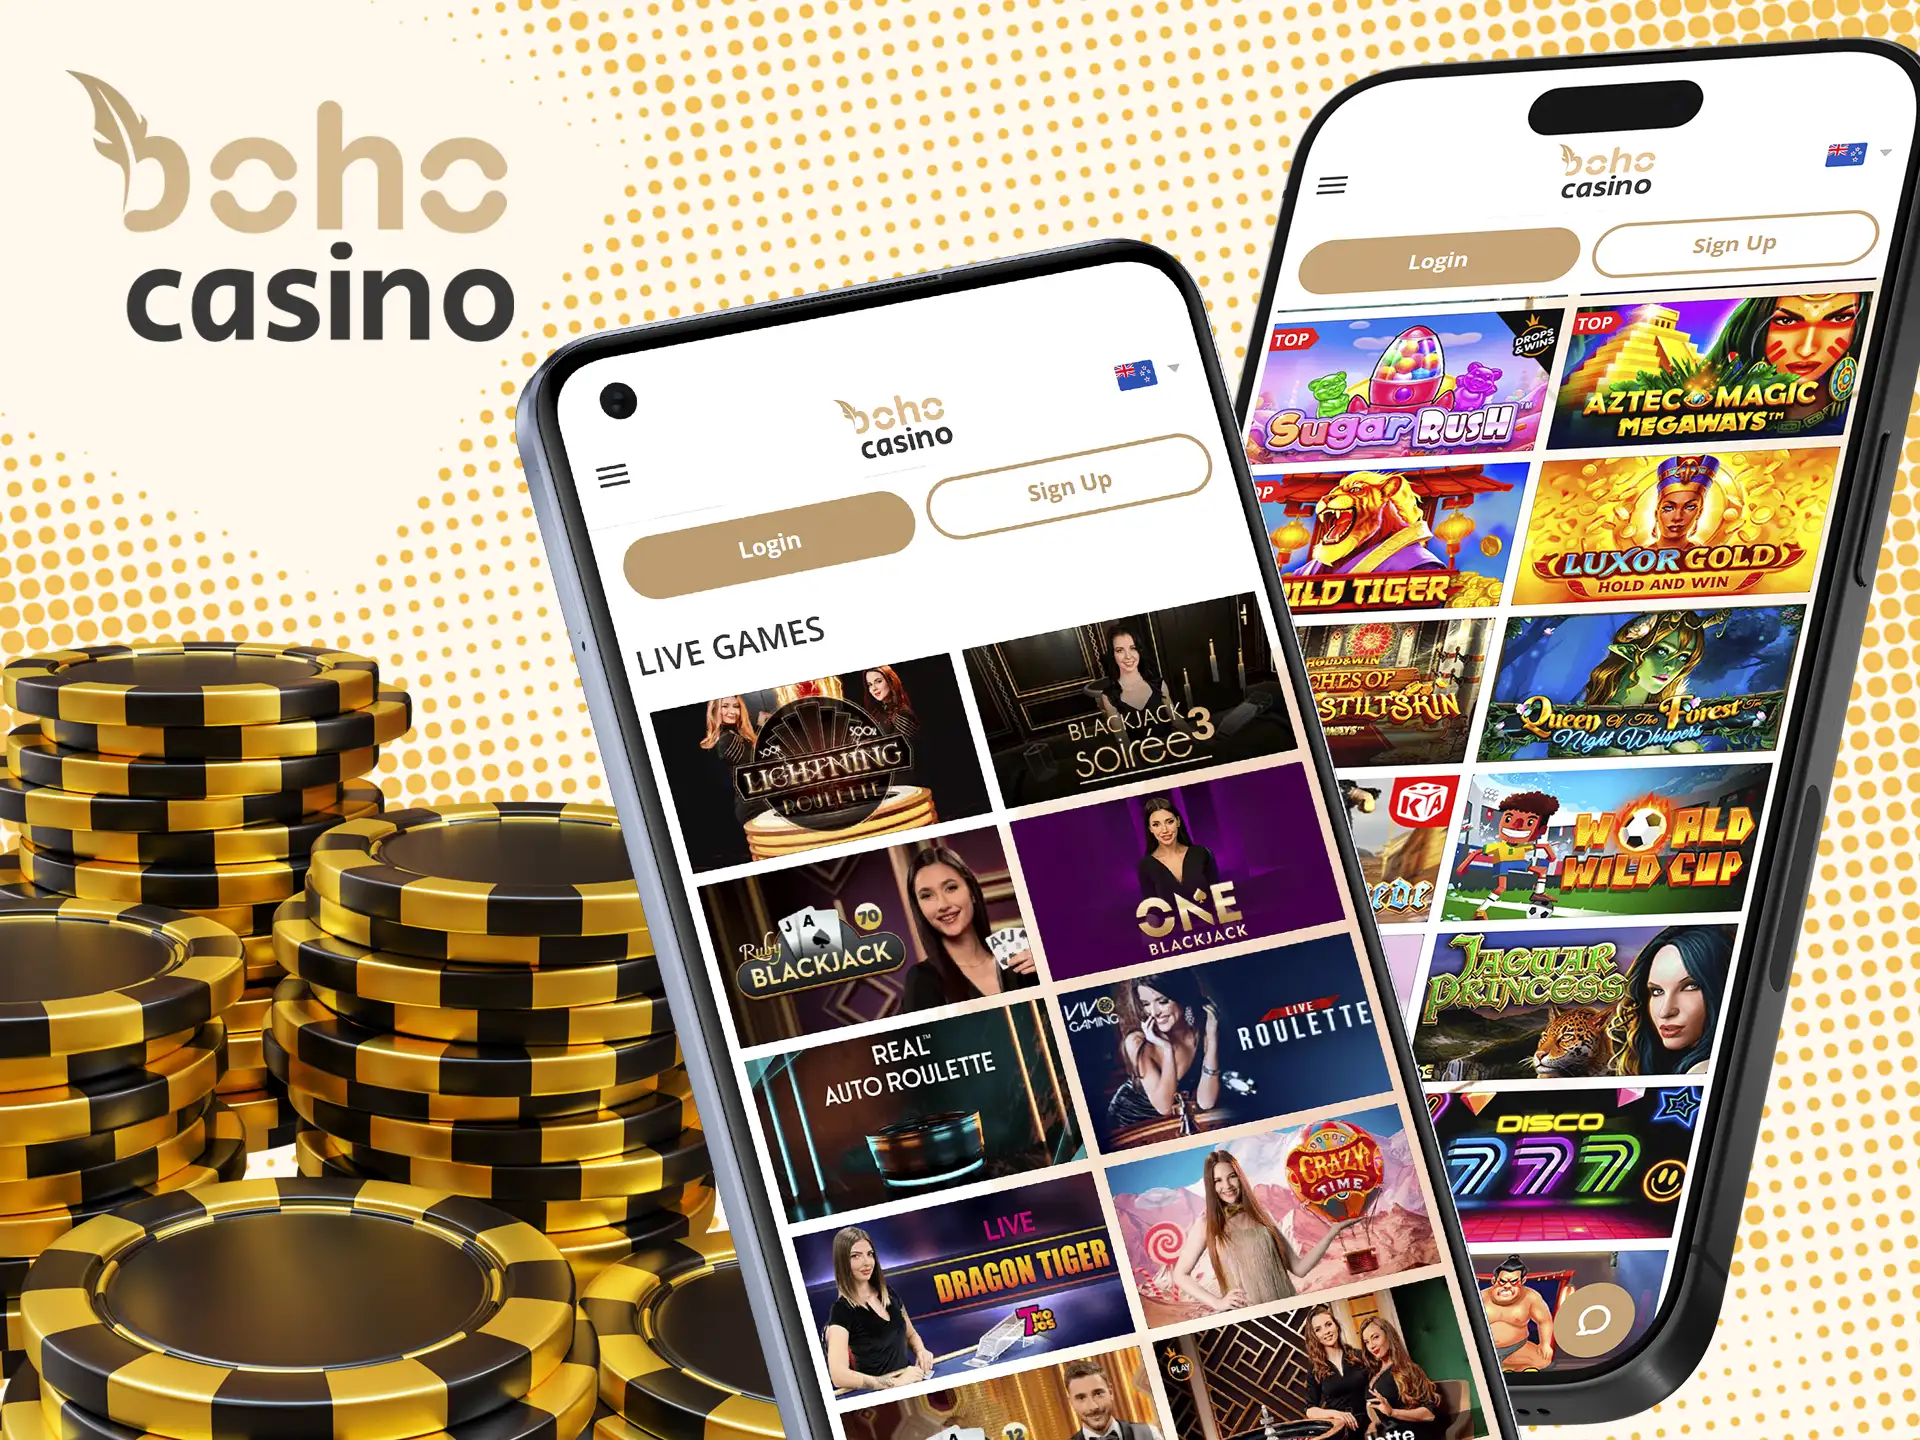 You can use the mobile version of Boho Casino on any device.